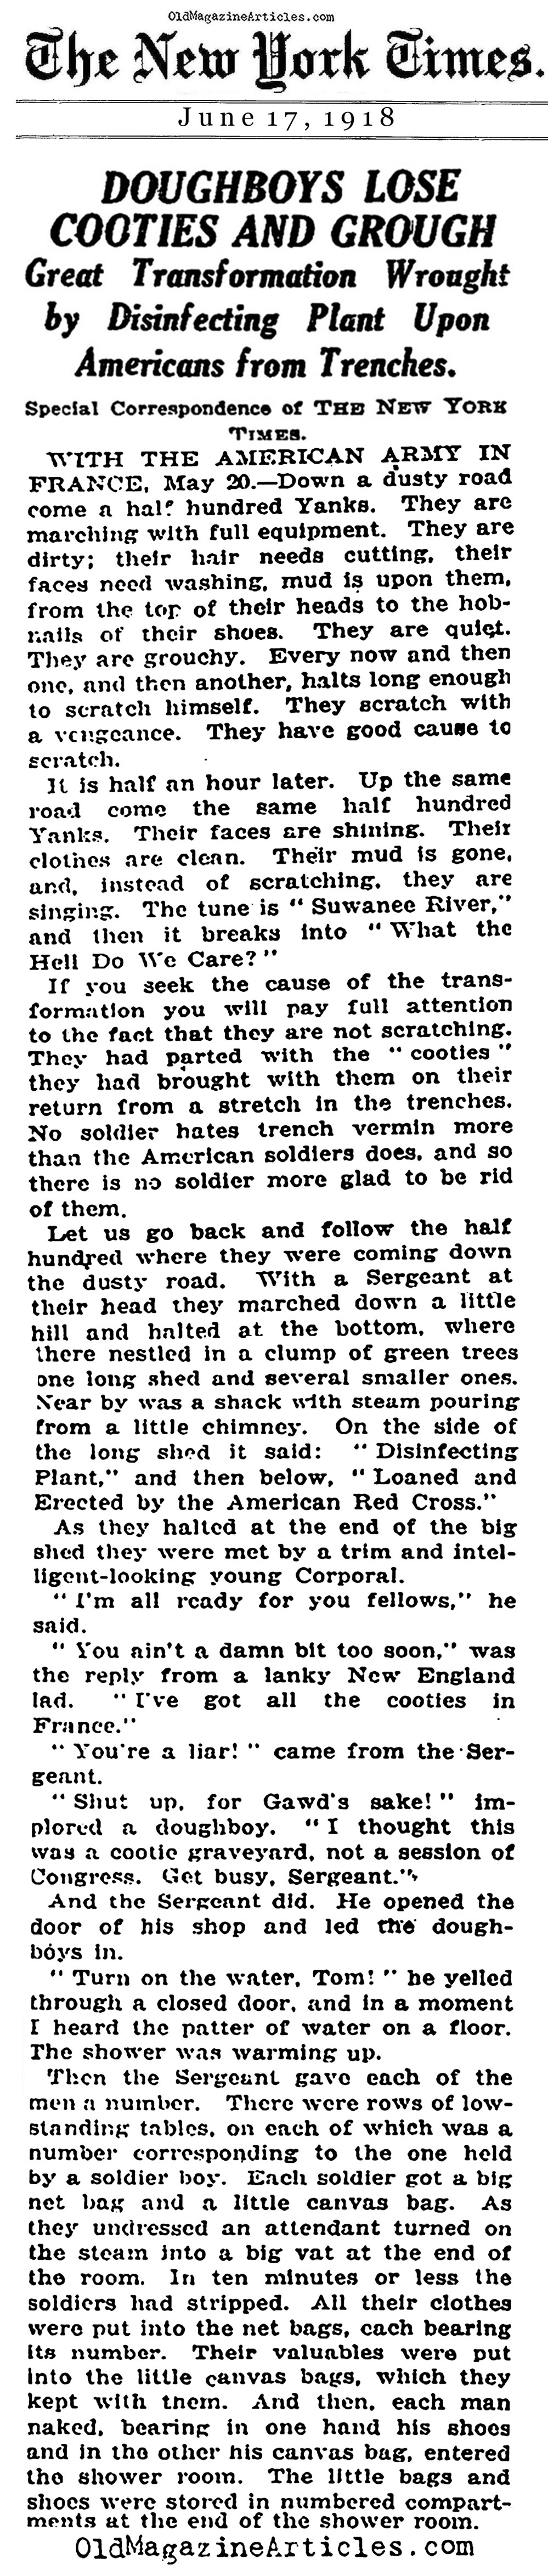 The Battle of the Cooties (NY Times, 1918)